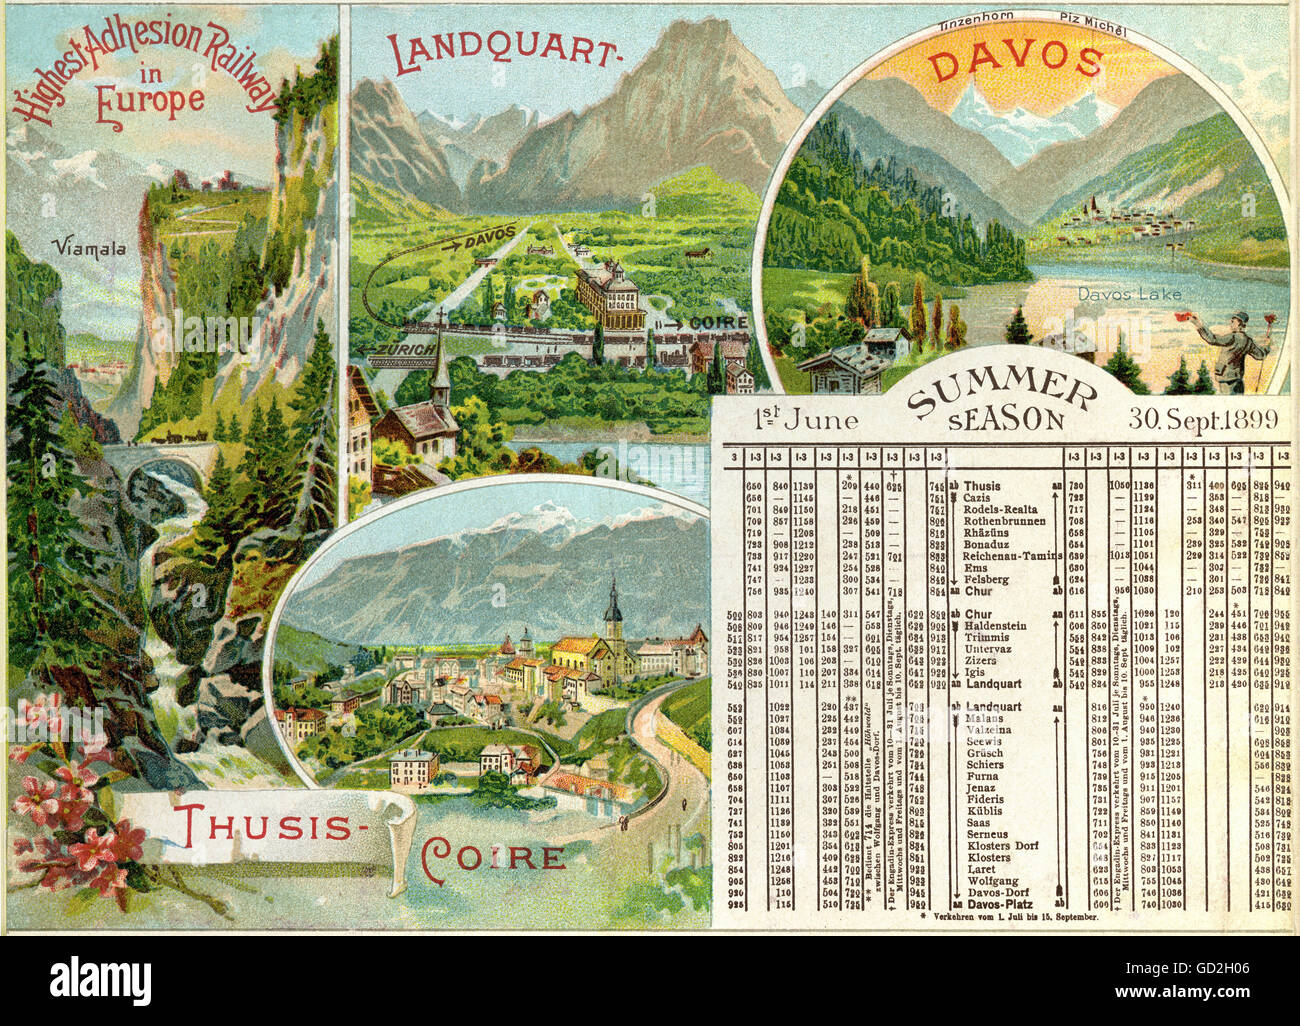 transport / transportation,railway,Rhaetian railway,adhesion railway,opened: 1888,enhanced: 1896,summer timetable 1899 for international tourists in English,lithograph,Switzerland,1899,narrow gauge railway,rail connection,rail link,railroad service,railway service,railway connections,tracks,Thusis,Chur,Landquart,Davos,beginning of the Swiss tourism,Alps,infrastructure,departure times,timetable,time-table,schedule,timetables,time-tables,schedules,connection,connexion,connections,connexions,technology,technologies,traffic engi,Additional-Rights-Clearences-Not Available Stock Photo